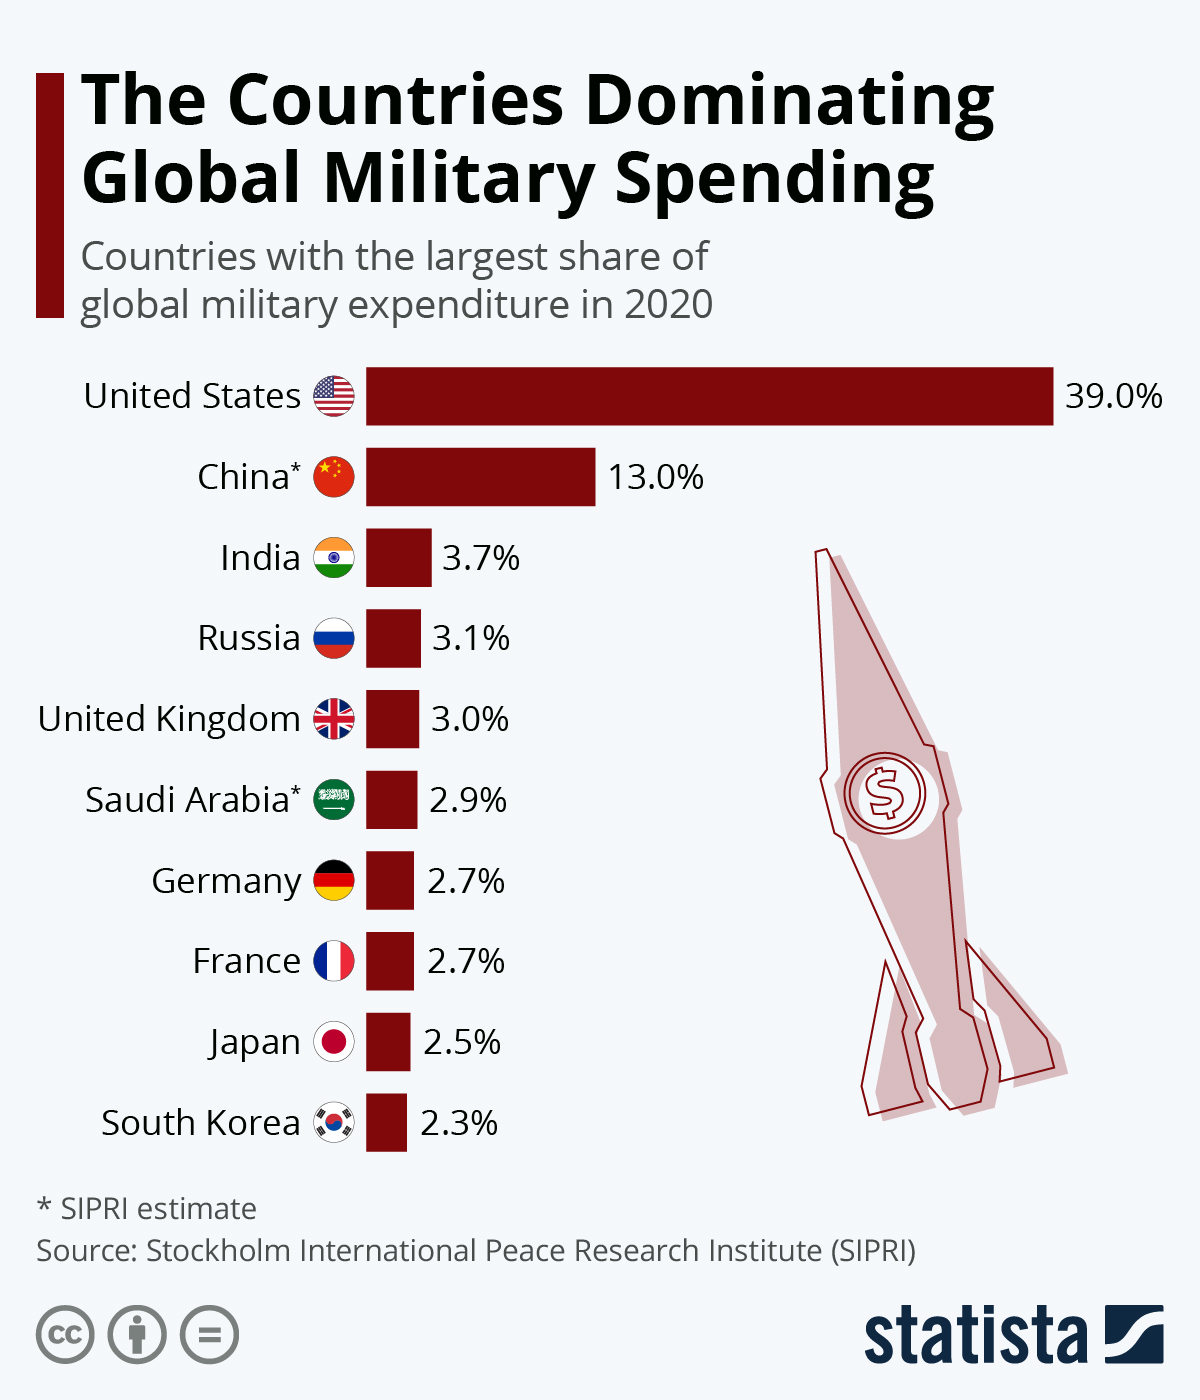 Which country has the highest military spending?